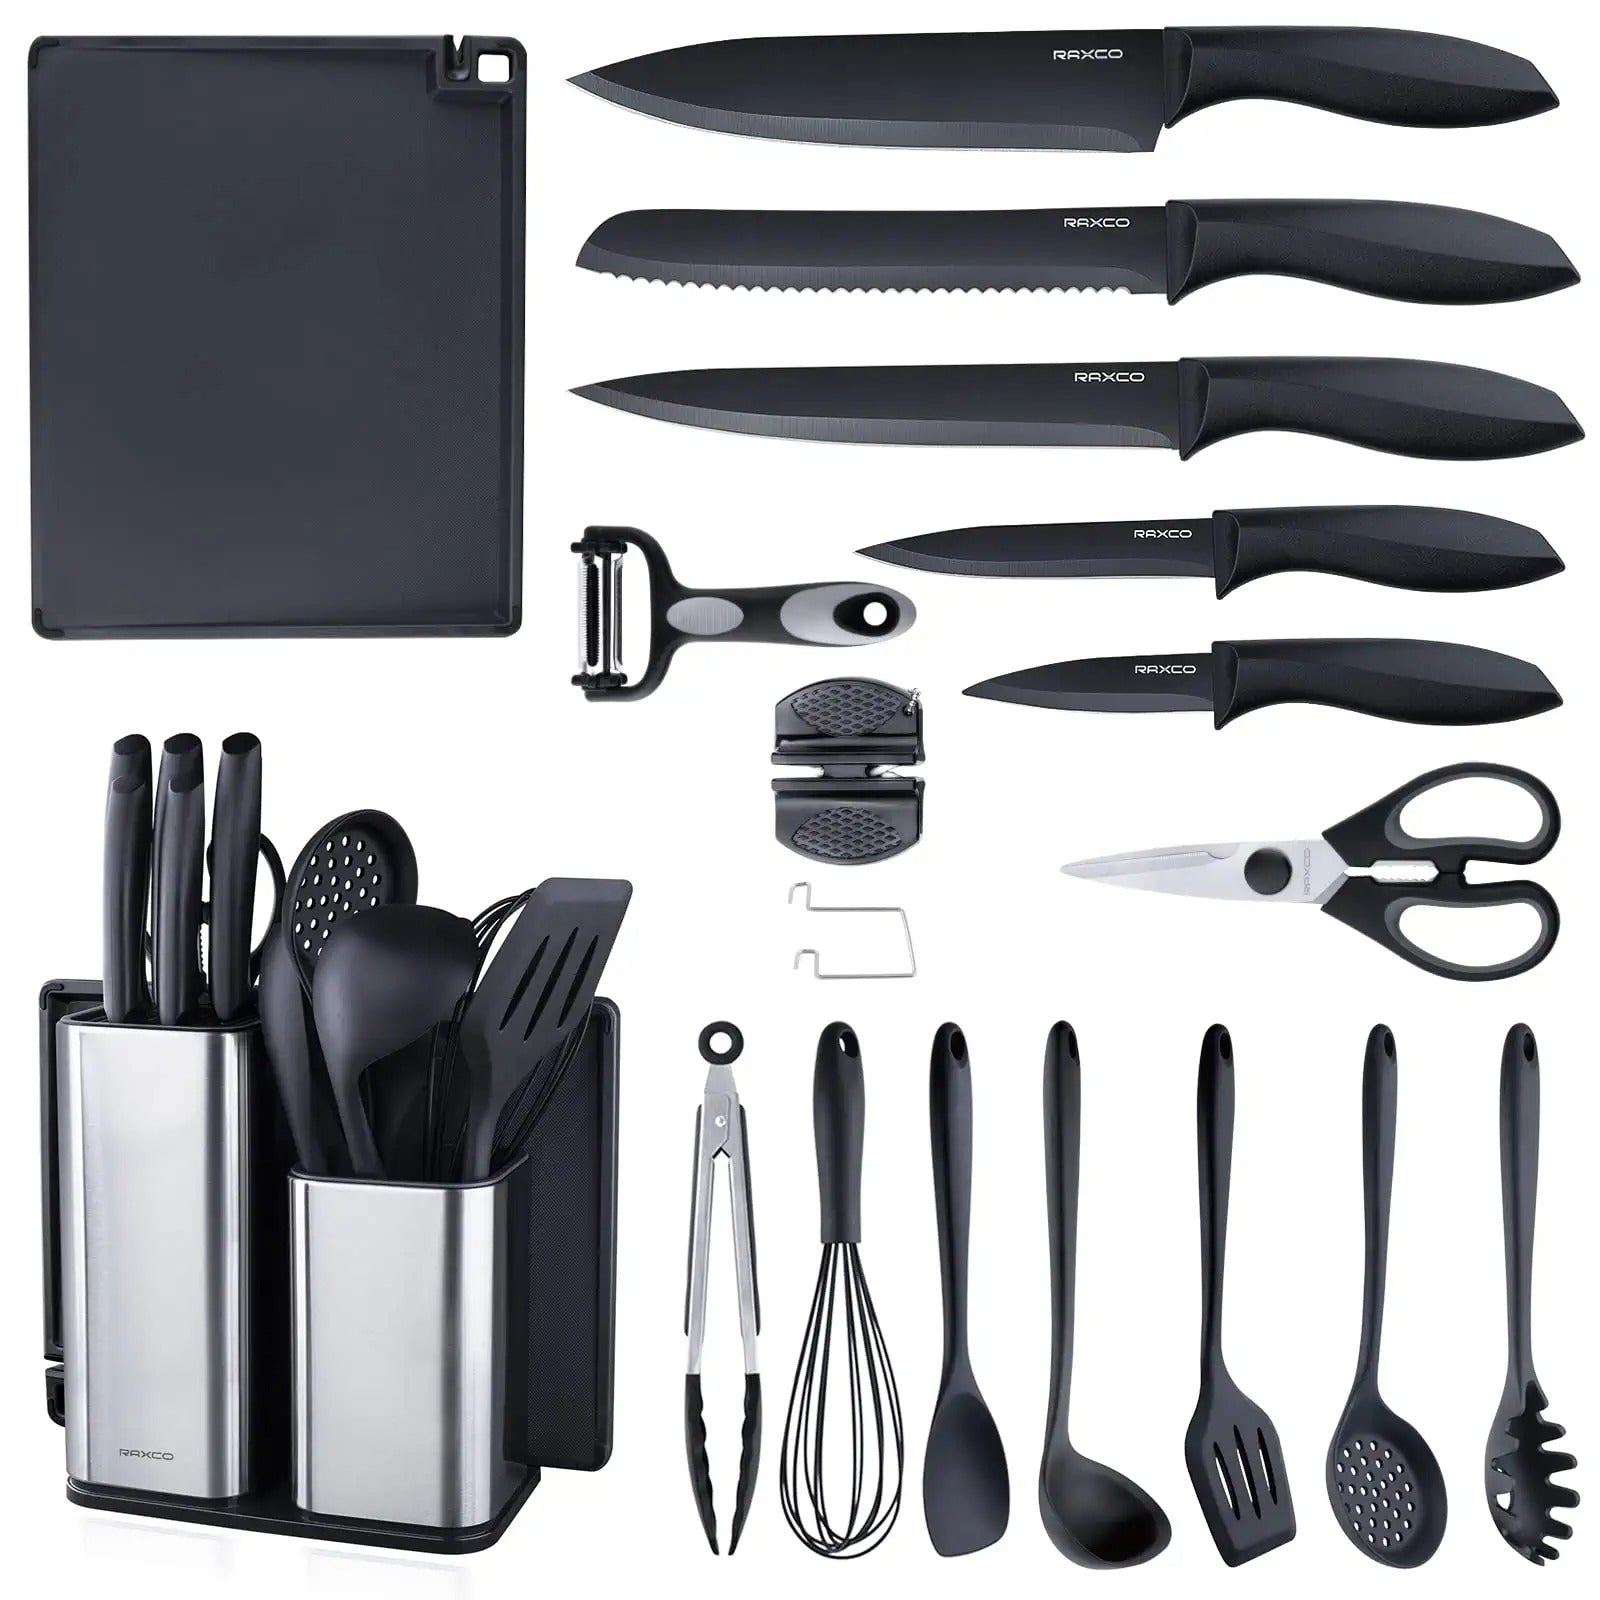  19 Pieces Kitchen Utensils and Knife Set with Block, with 9  Piece Silicone Cooking Utensils Set 5 Piece Sharp Stainless Steel Chef  Knives Scissors Whisk Tongs and Cutting Board (19 in